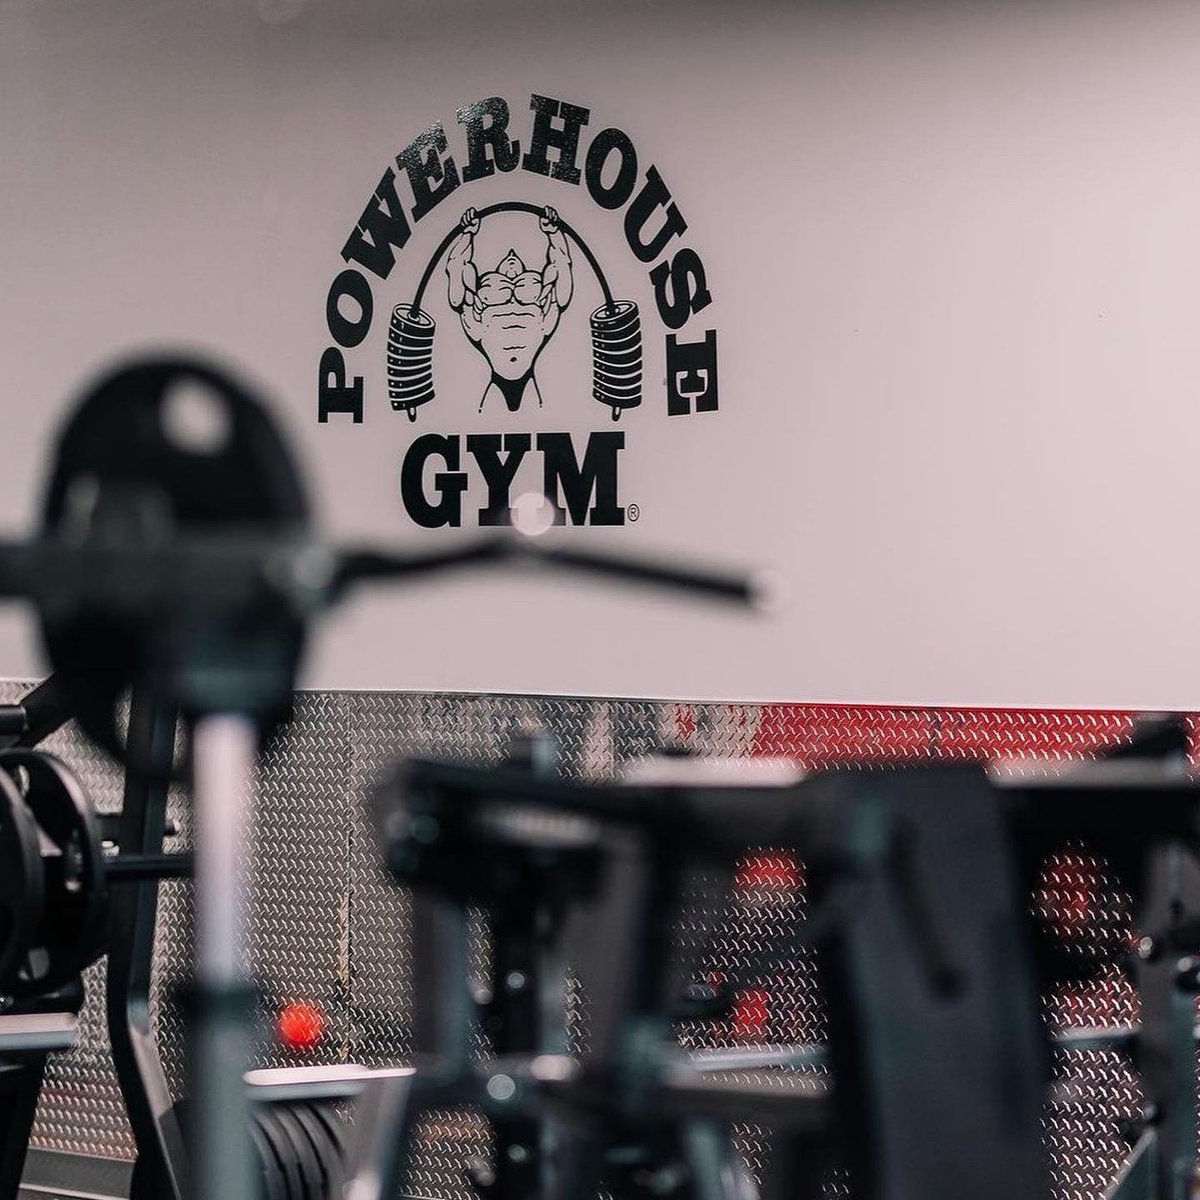 Level up your fitness goals for the new year with a membership at Powerhouse Gym. 💪 Call (954)376-7693 to join and get your first month free!